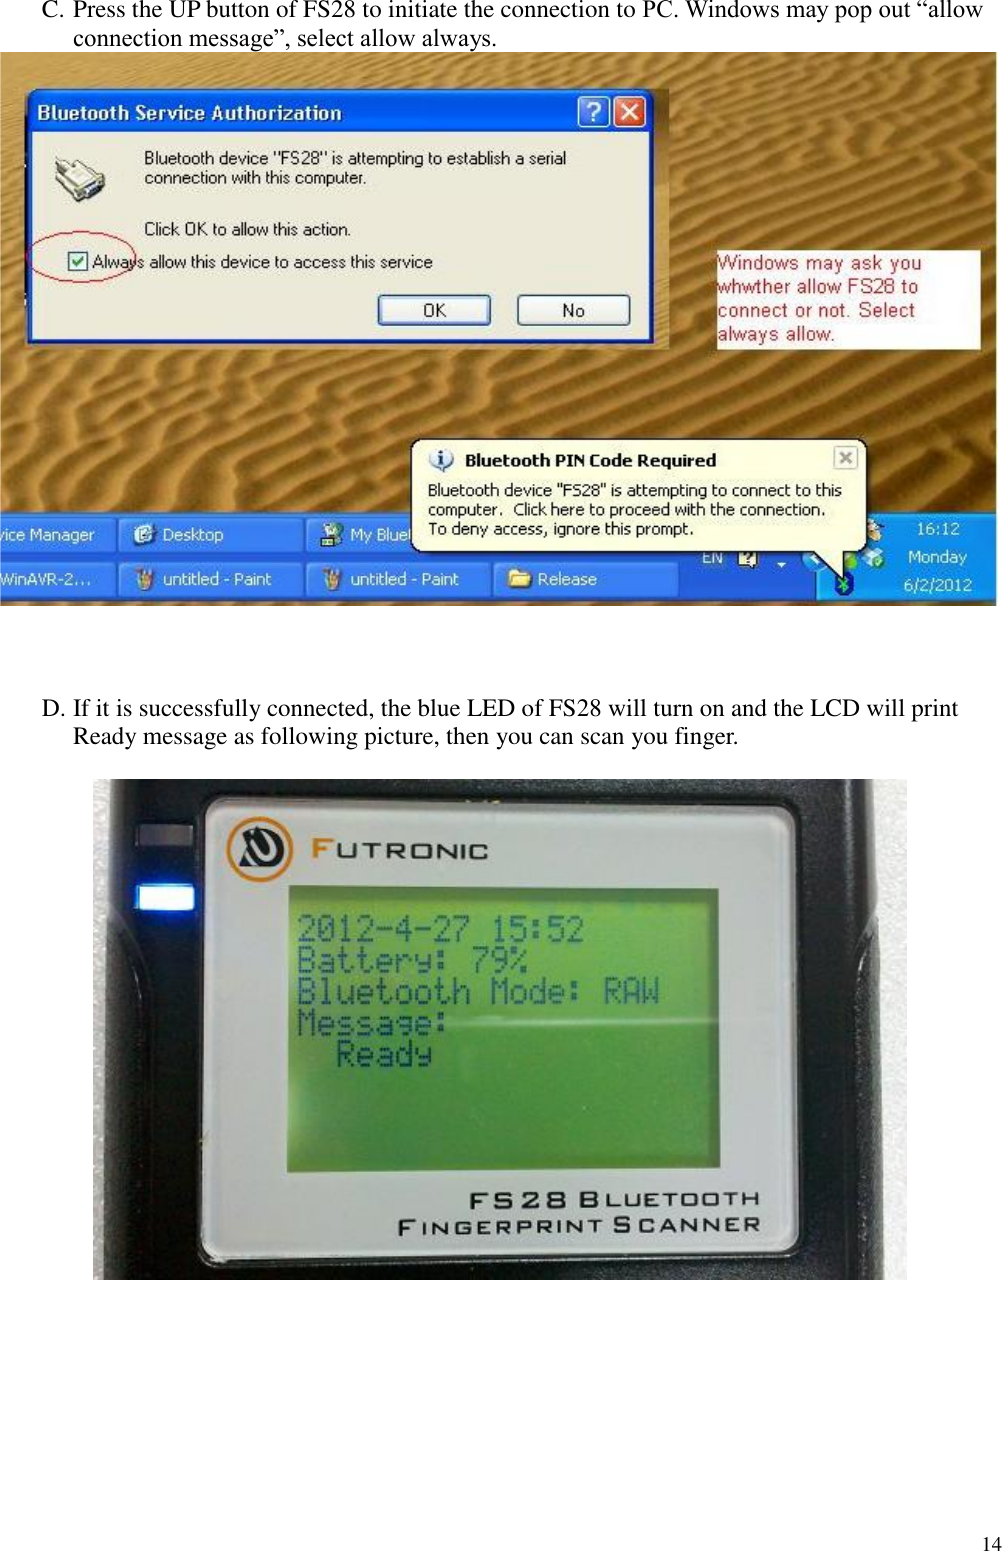  14  C. Press the UP button of FS28 to initiate the connection to PC. Windows may pop out “allow connection message”, select allow always.     D. If it is successfully connected, the blue LED of FS28 will turn on and the LCD will print Ready message as following picture, then you can scan you finger.           